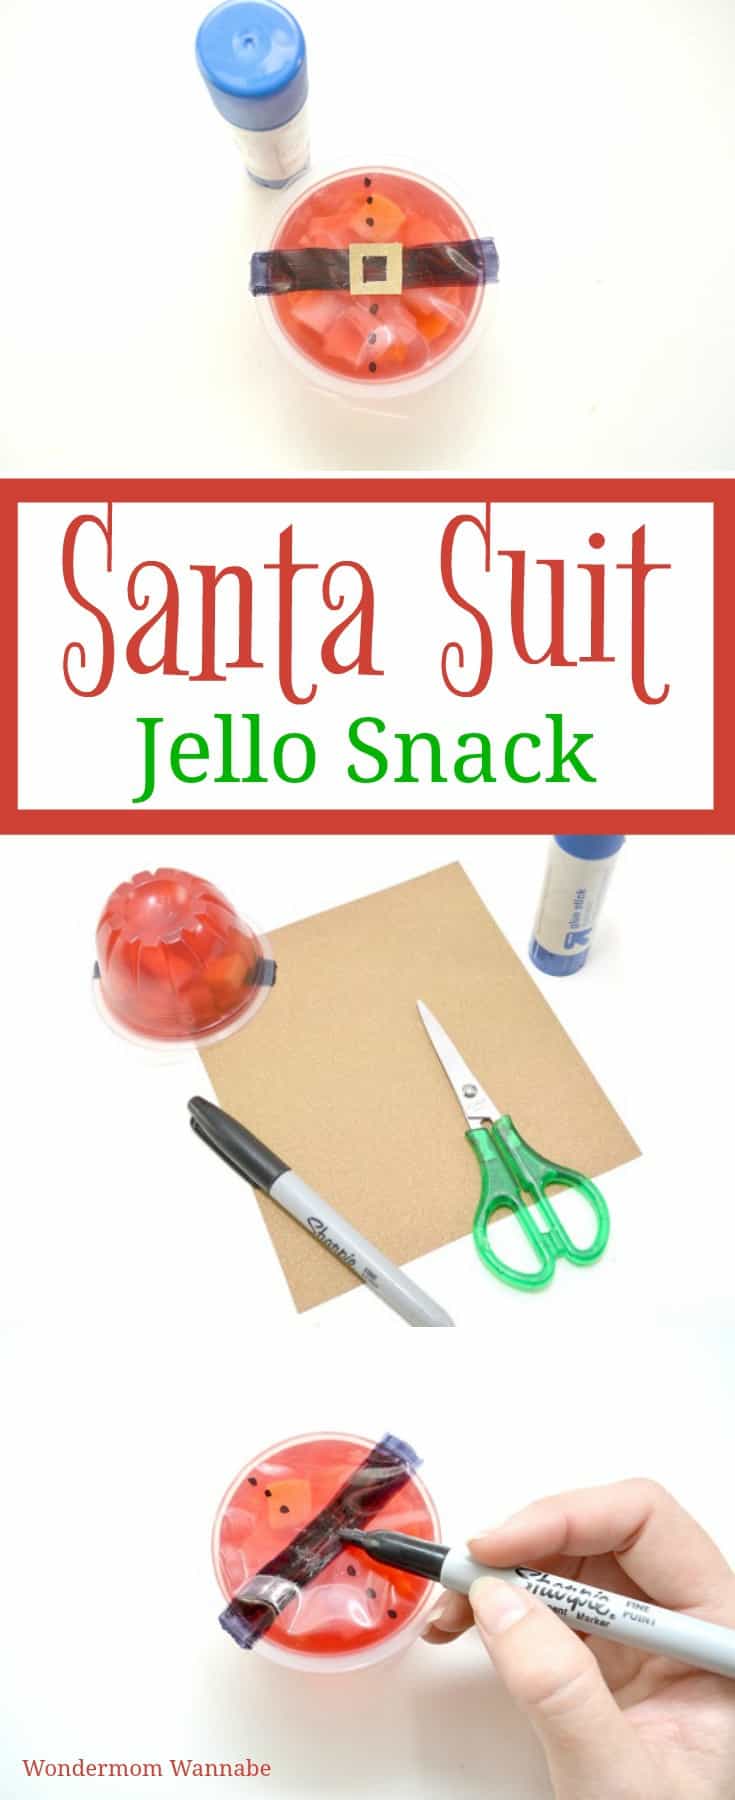 You just need a few minutes to transform your child's lunchbox dessert into a holiday surprise. Find out how to make this Santa Suit Jello Snack. #snack #lunchbox #forkids #santa via @wondermomwannab